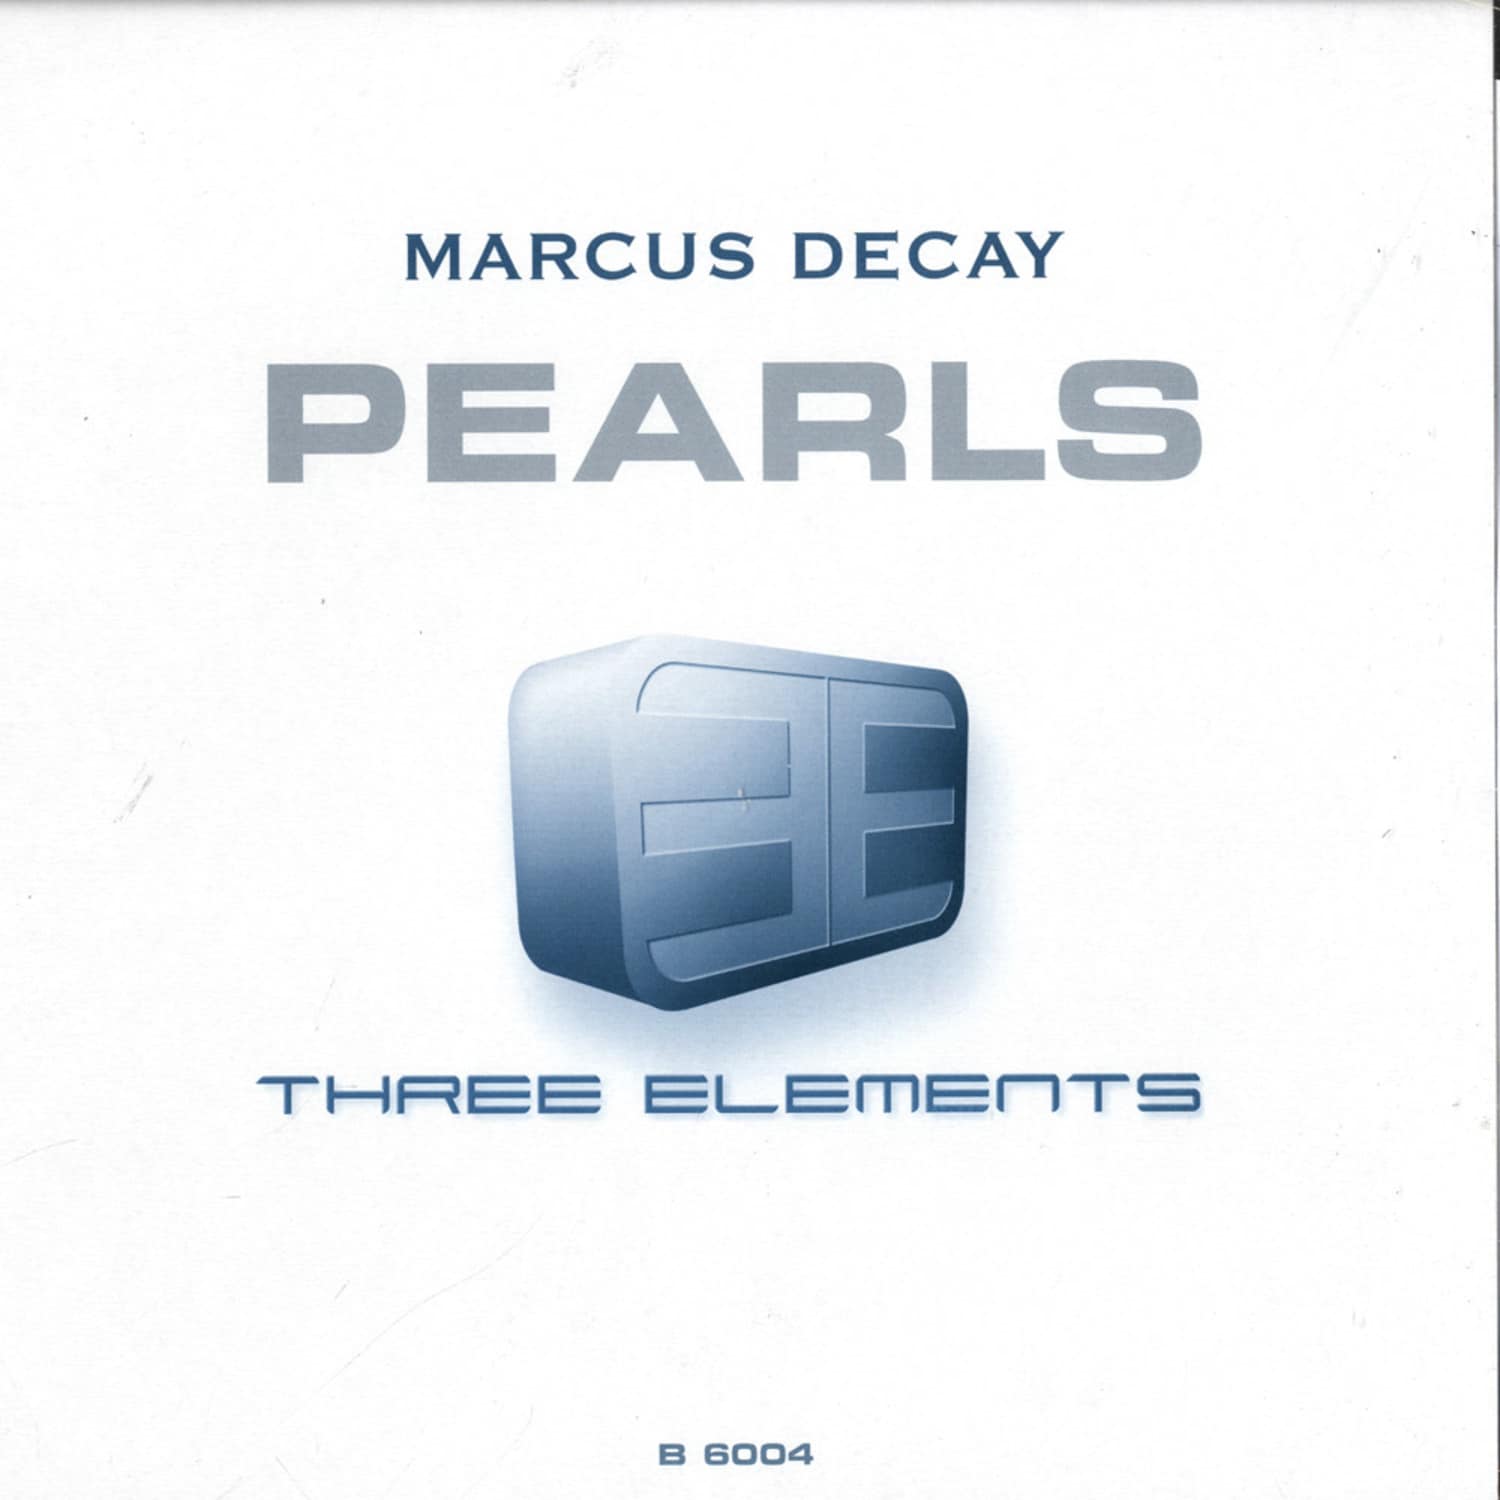 Marcus Decay - PEARLS